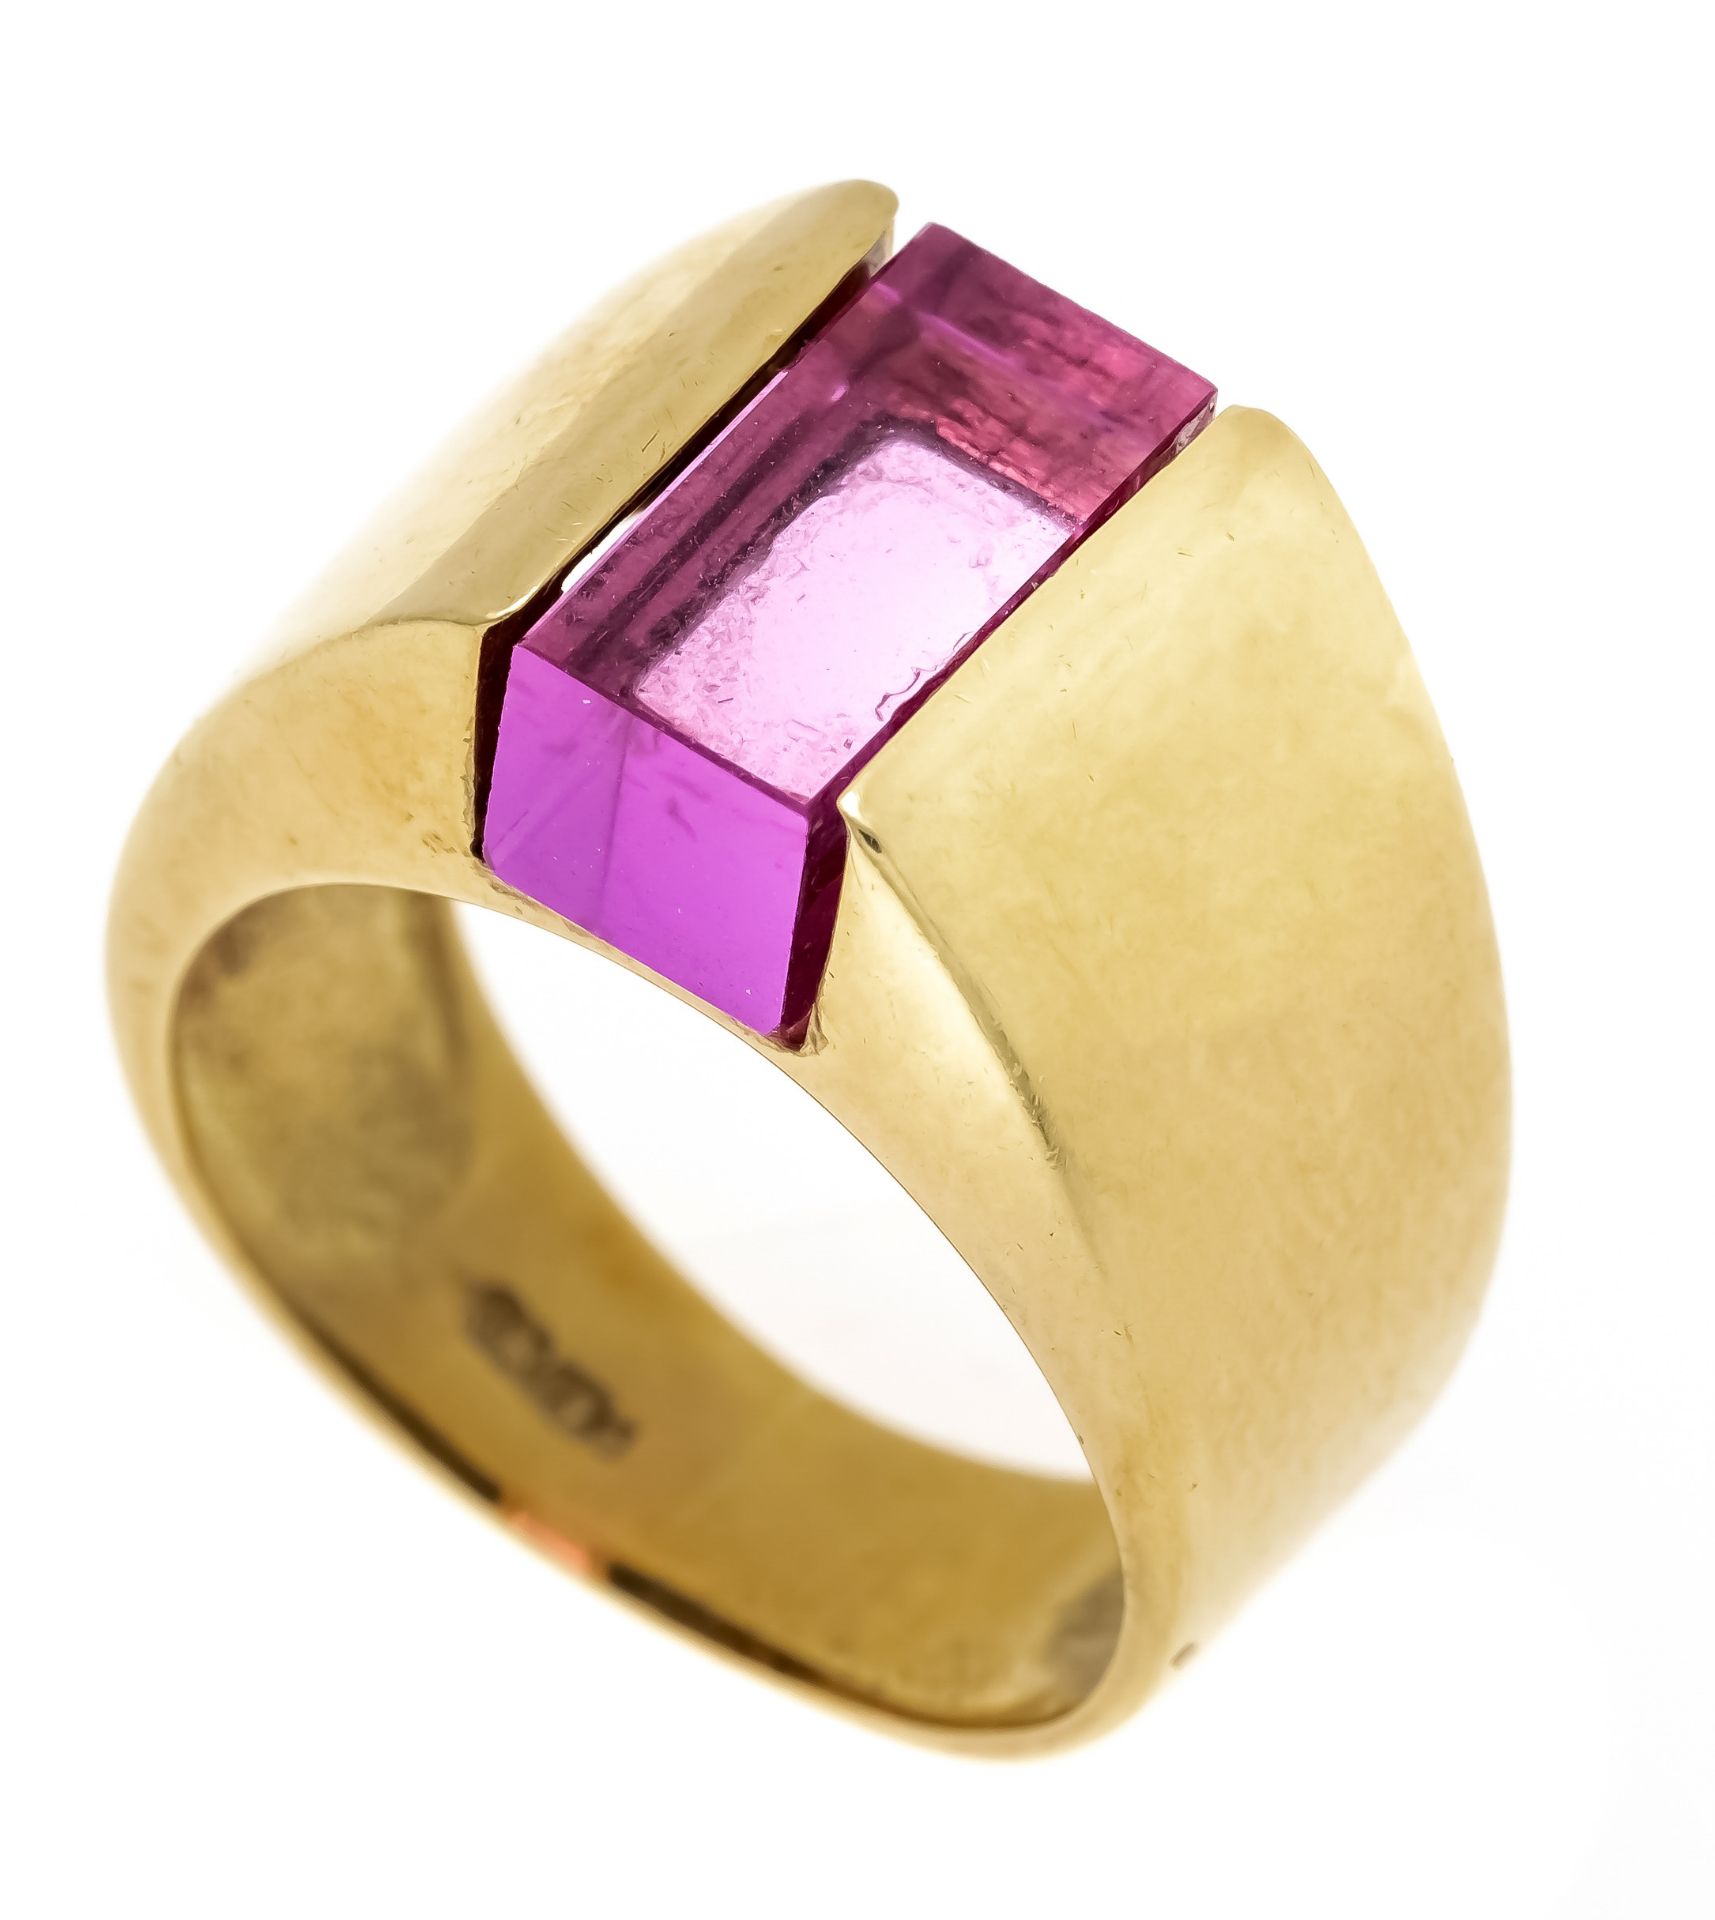 Designer ring GG 750/000 with a cuboid faceted pink gemstone 11 x 5.5 x 5.5 mm, RG 55, 8.5 g